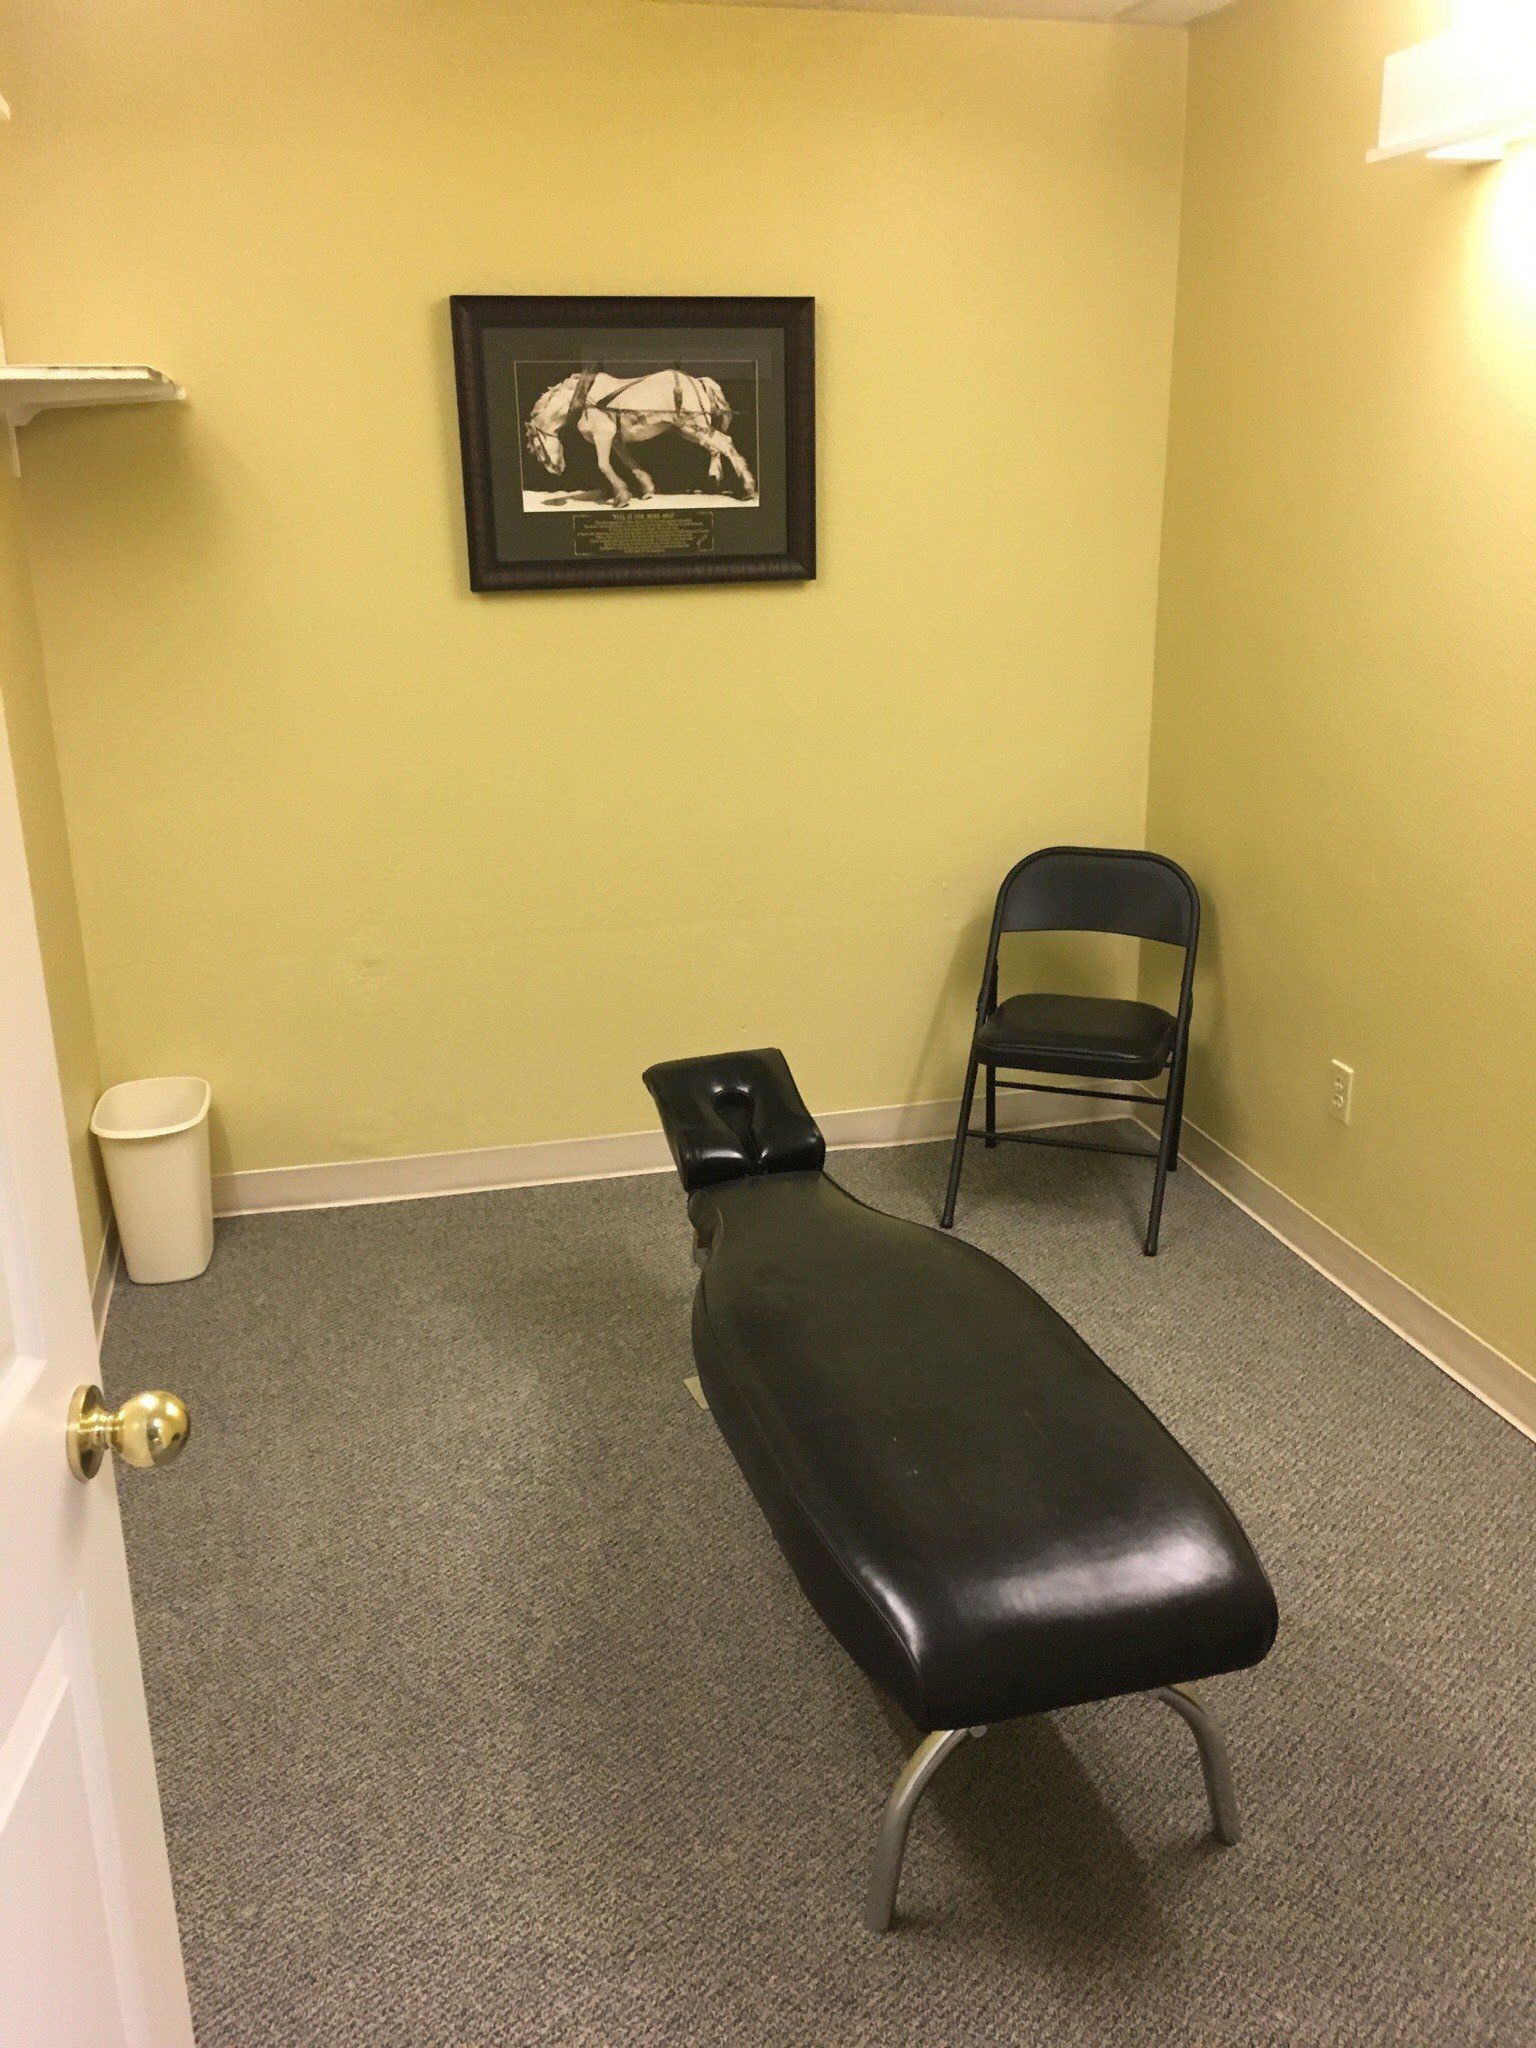 Chiropractor Small Table